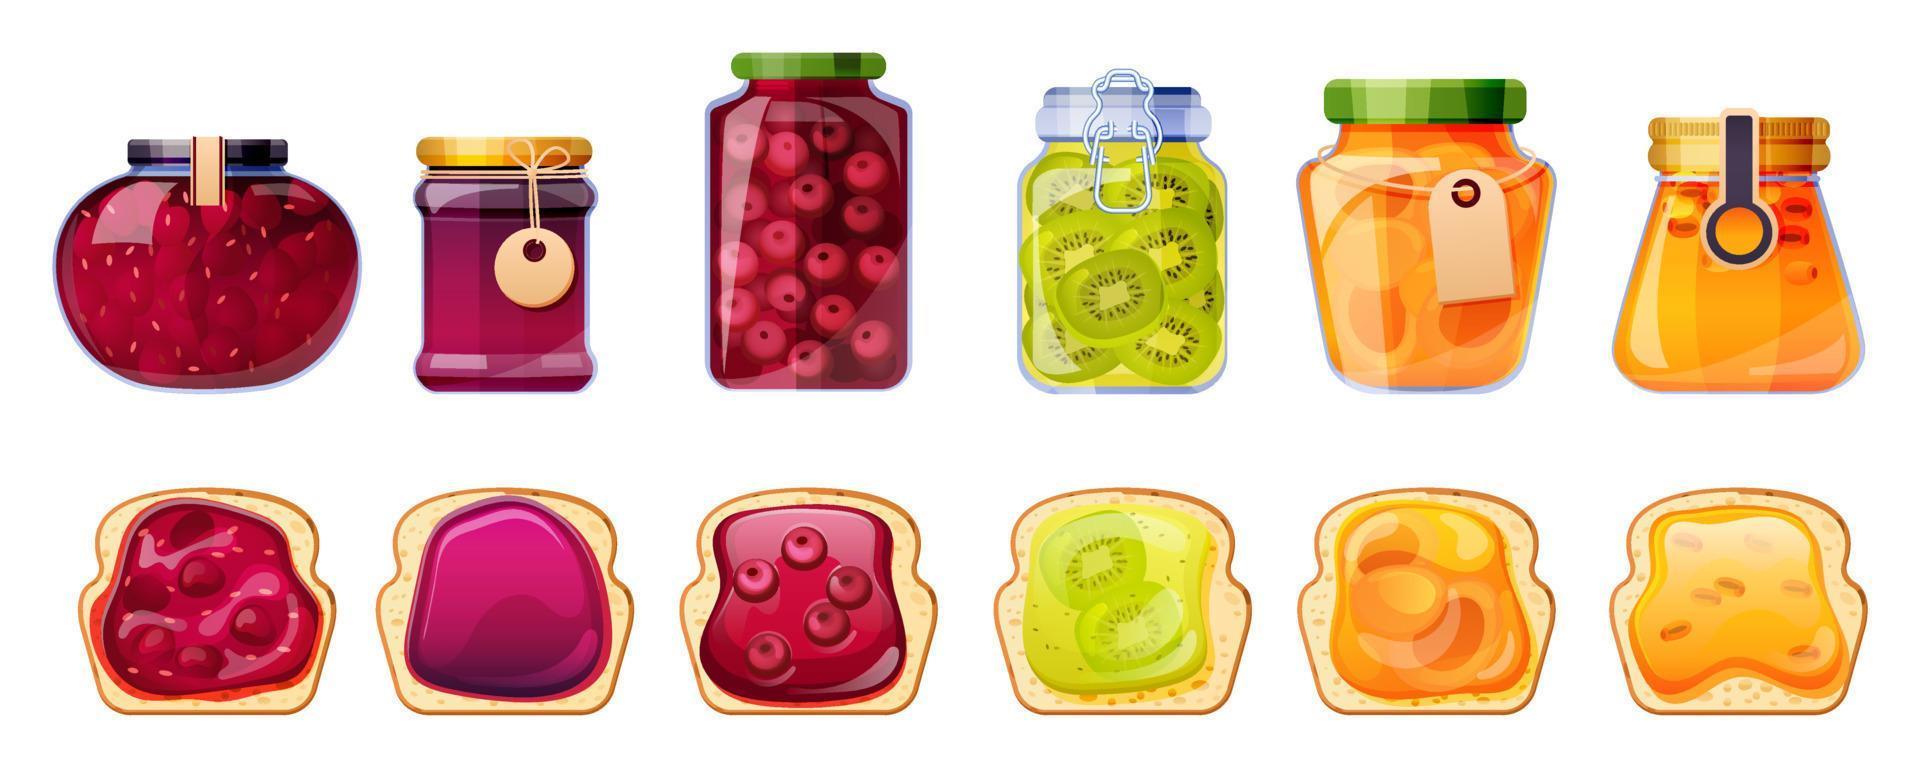 Jam jars and bread toasts, glass containers set vector